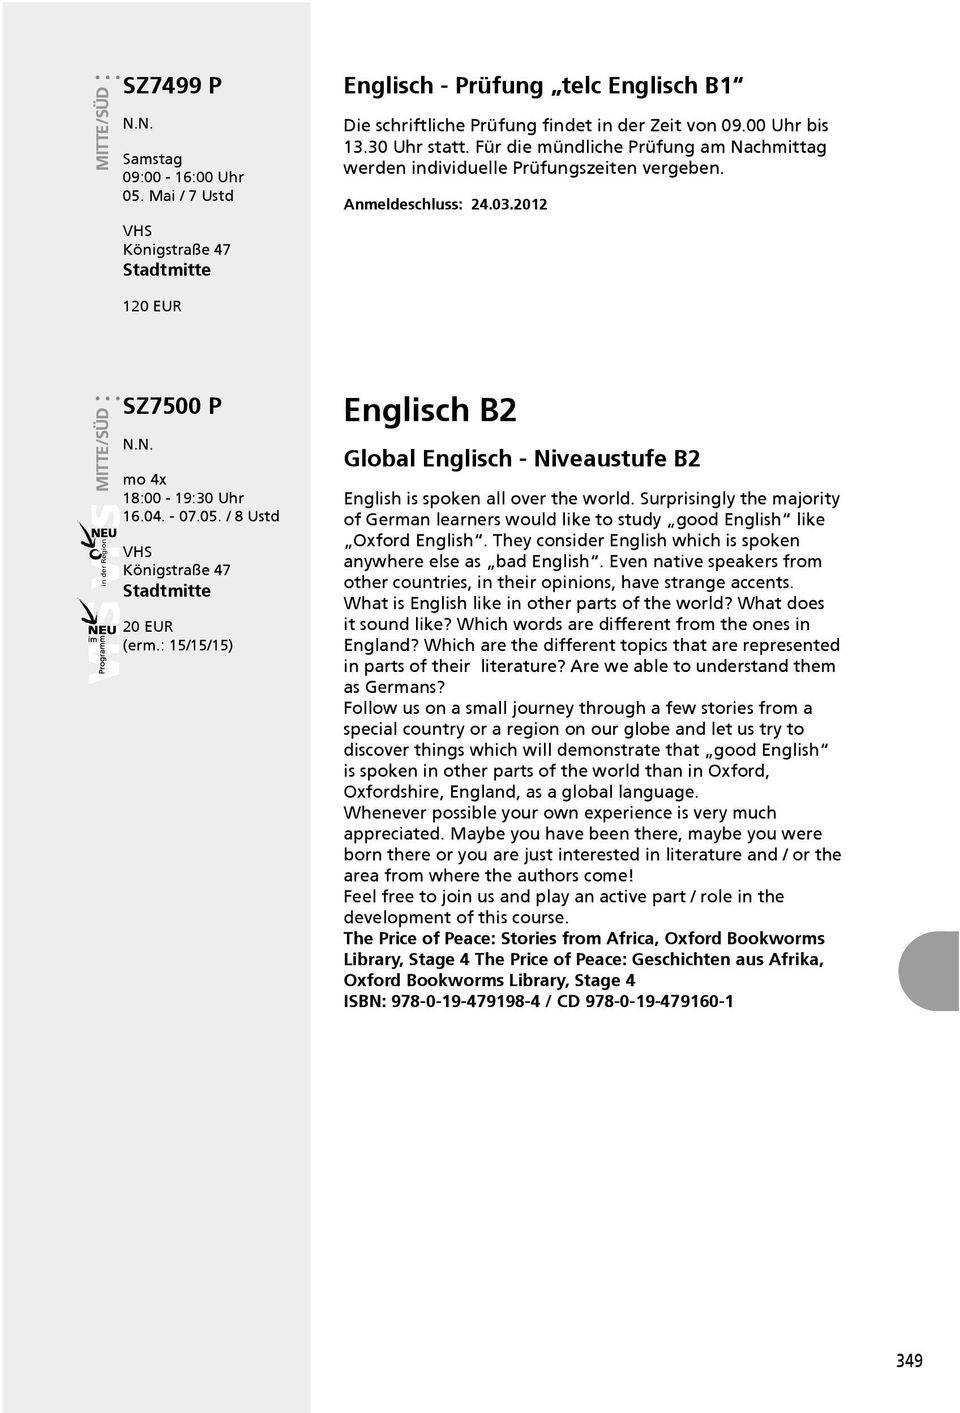 : 15/15/15) Englisch B2 Global Englisch - Niveaustufe B2 English is spoken all over the world. Surprisingly the majority of German learners would like to study good English like Oxford English.